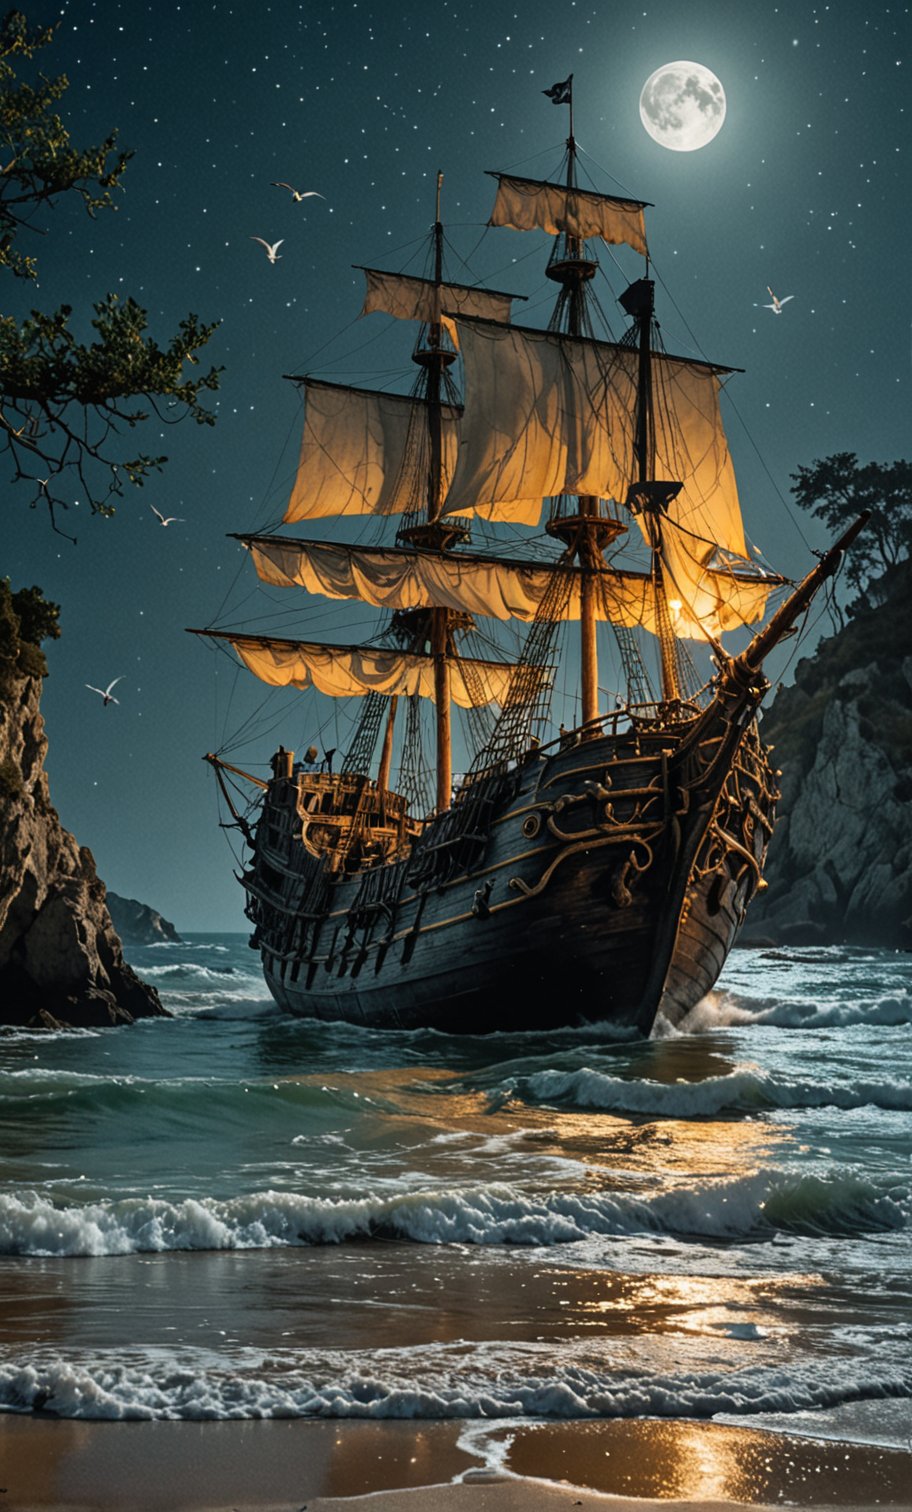 Ultra Close-up portrait, an old and large pirate ghost ship, abandoned and stranded in the waters of a deserted and wild beach at night with a large moon illuminating and reflecting in the sea, rocks and trees around, seagulls and birds flying, the ship is worn out by time and covered in vegetation, atmosphere of fantasy, mystery and dream, dramatic lighting, perfect framing of the image, film poster style, oil painting, vintage photo style, van gogh style, caravagio, Greg Rutkowski style